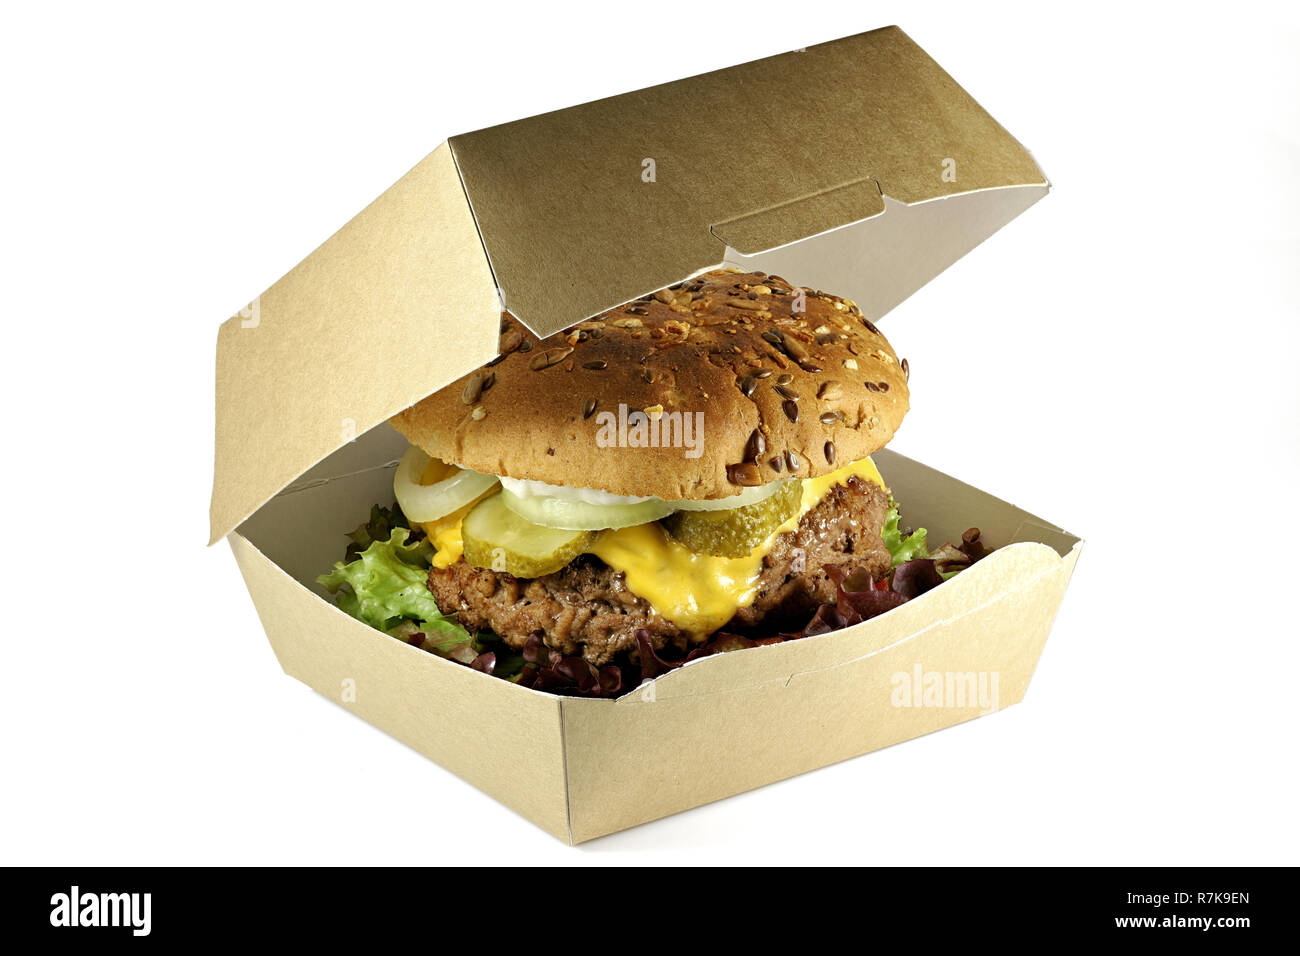 homemade cheeseburger in a cardboard box isolated on white background Stock Photo